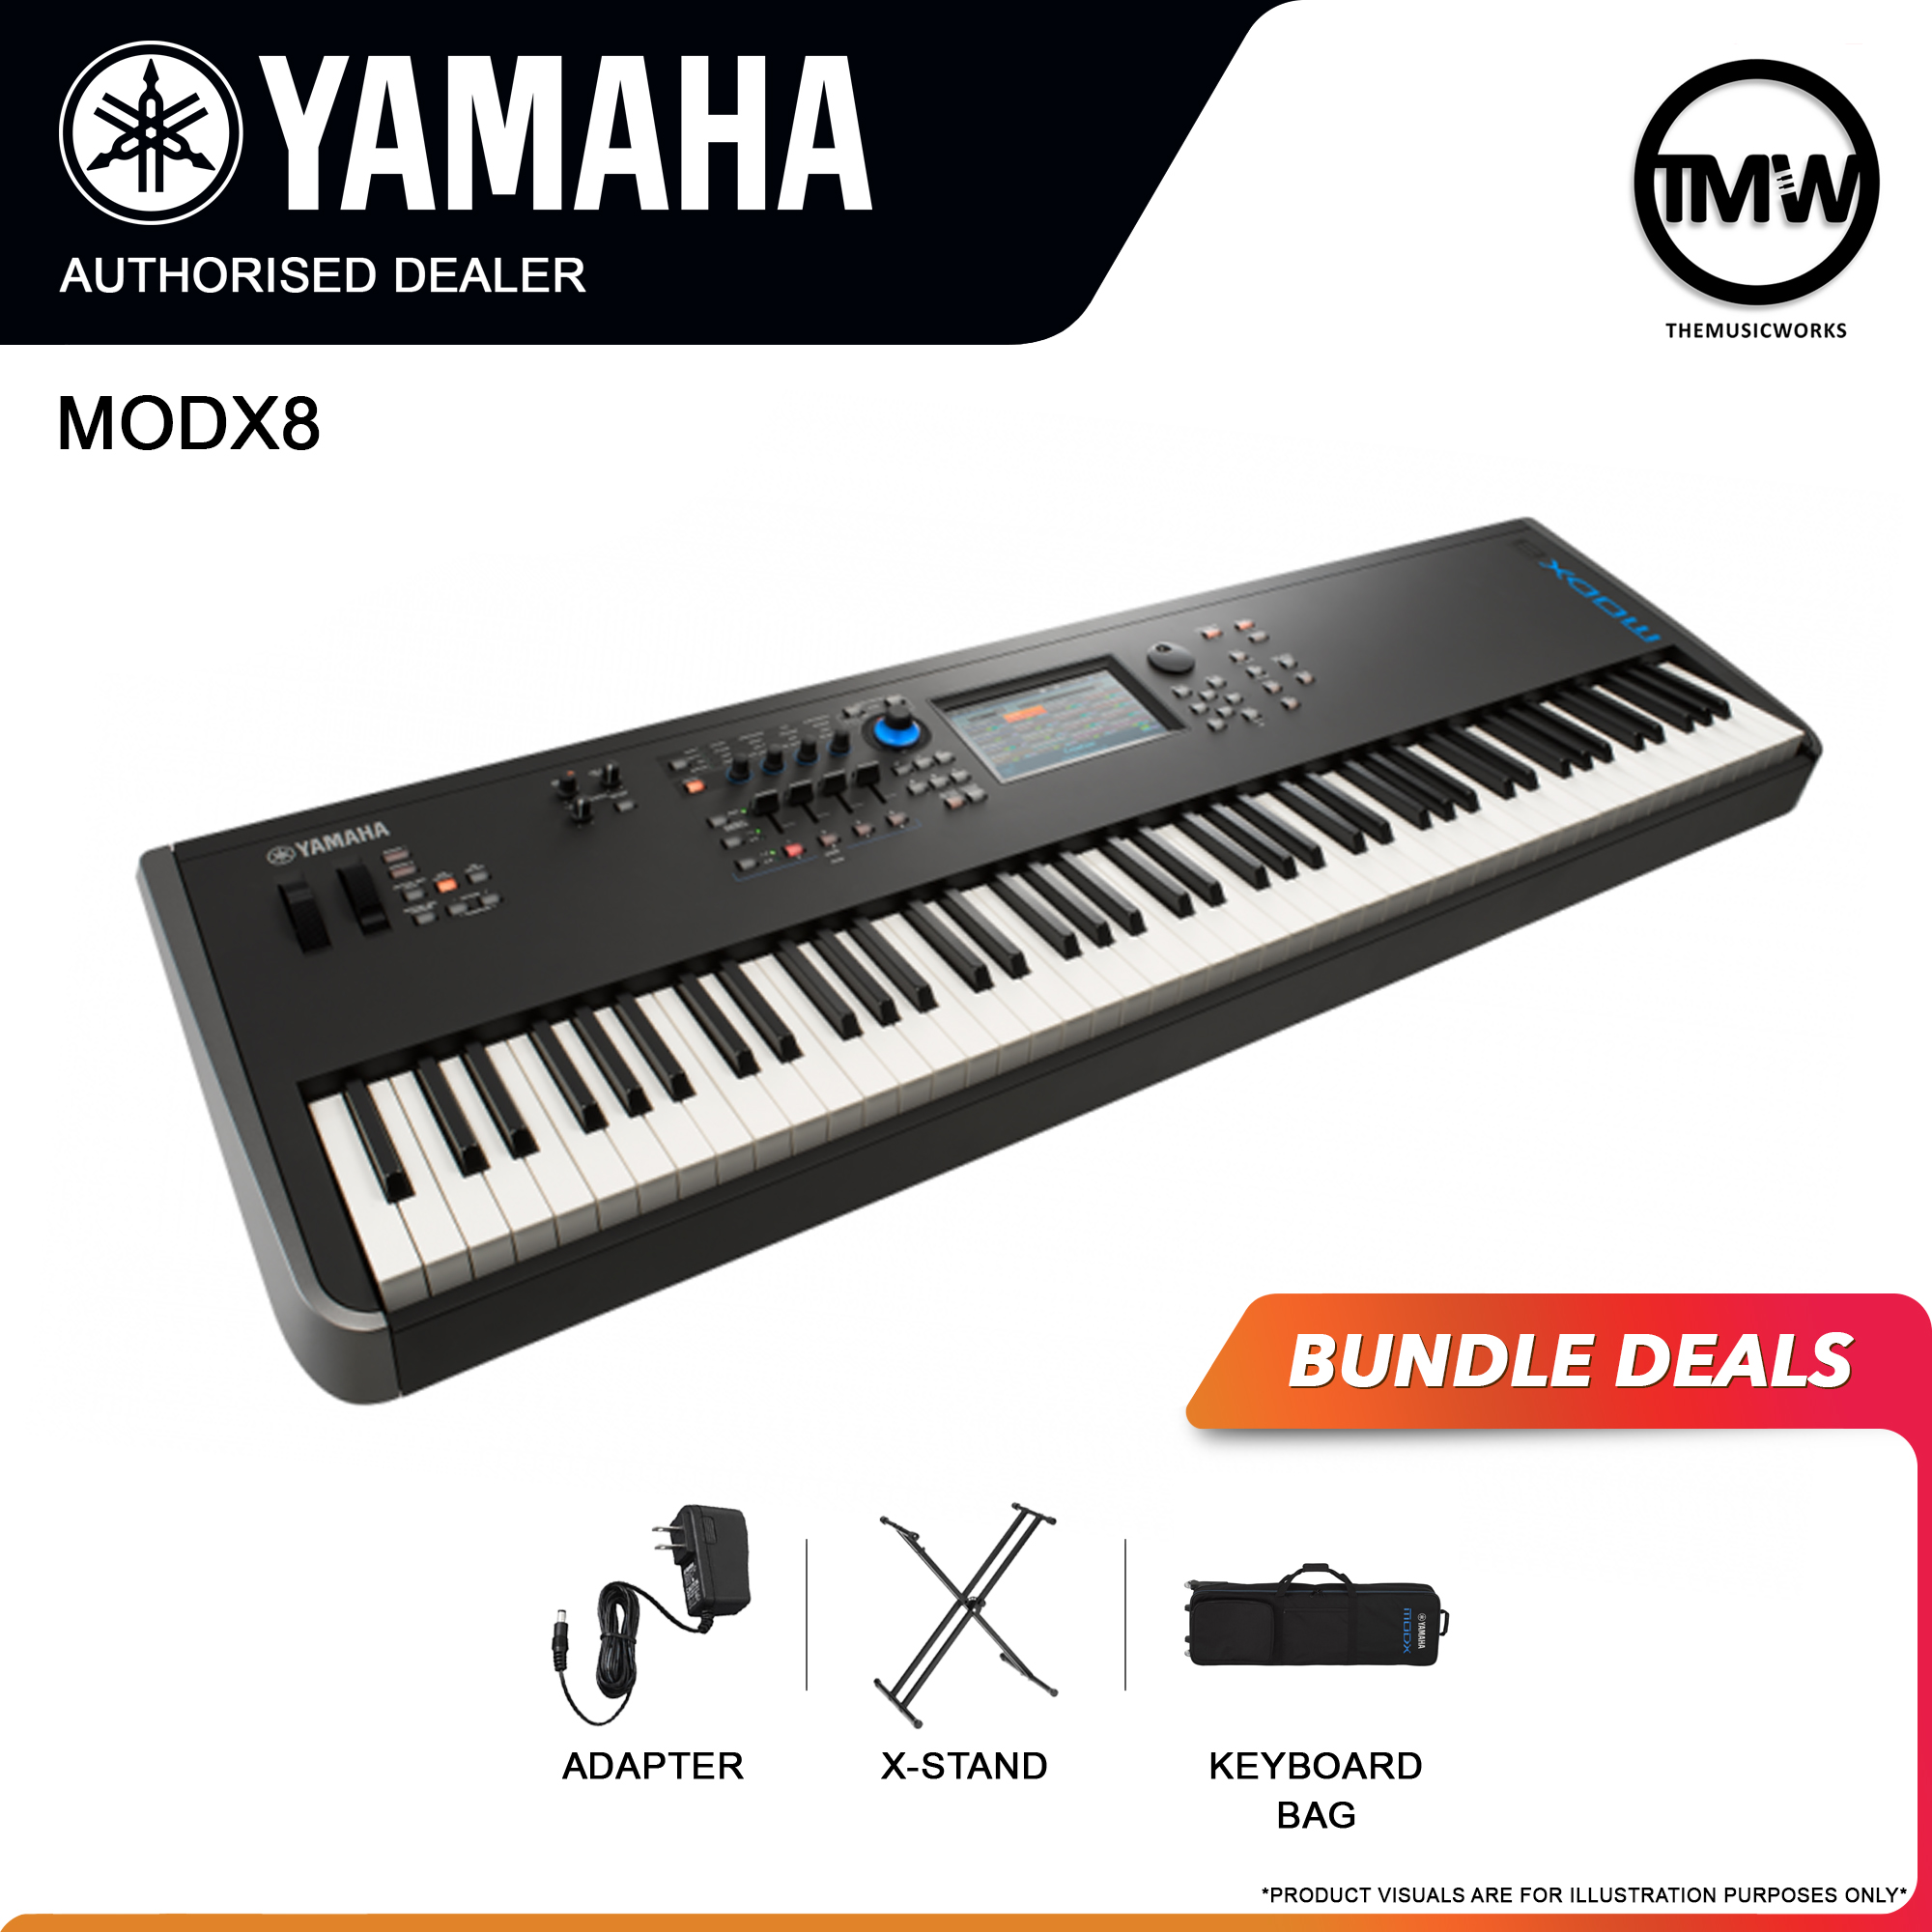 yamaha modx8 with adapter, x-stand, and keyboard bag